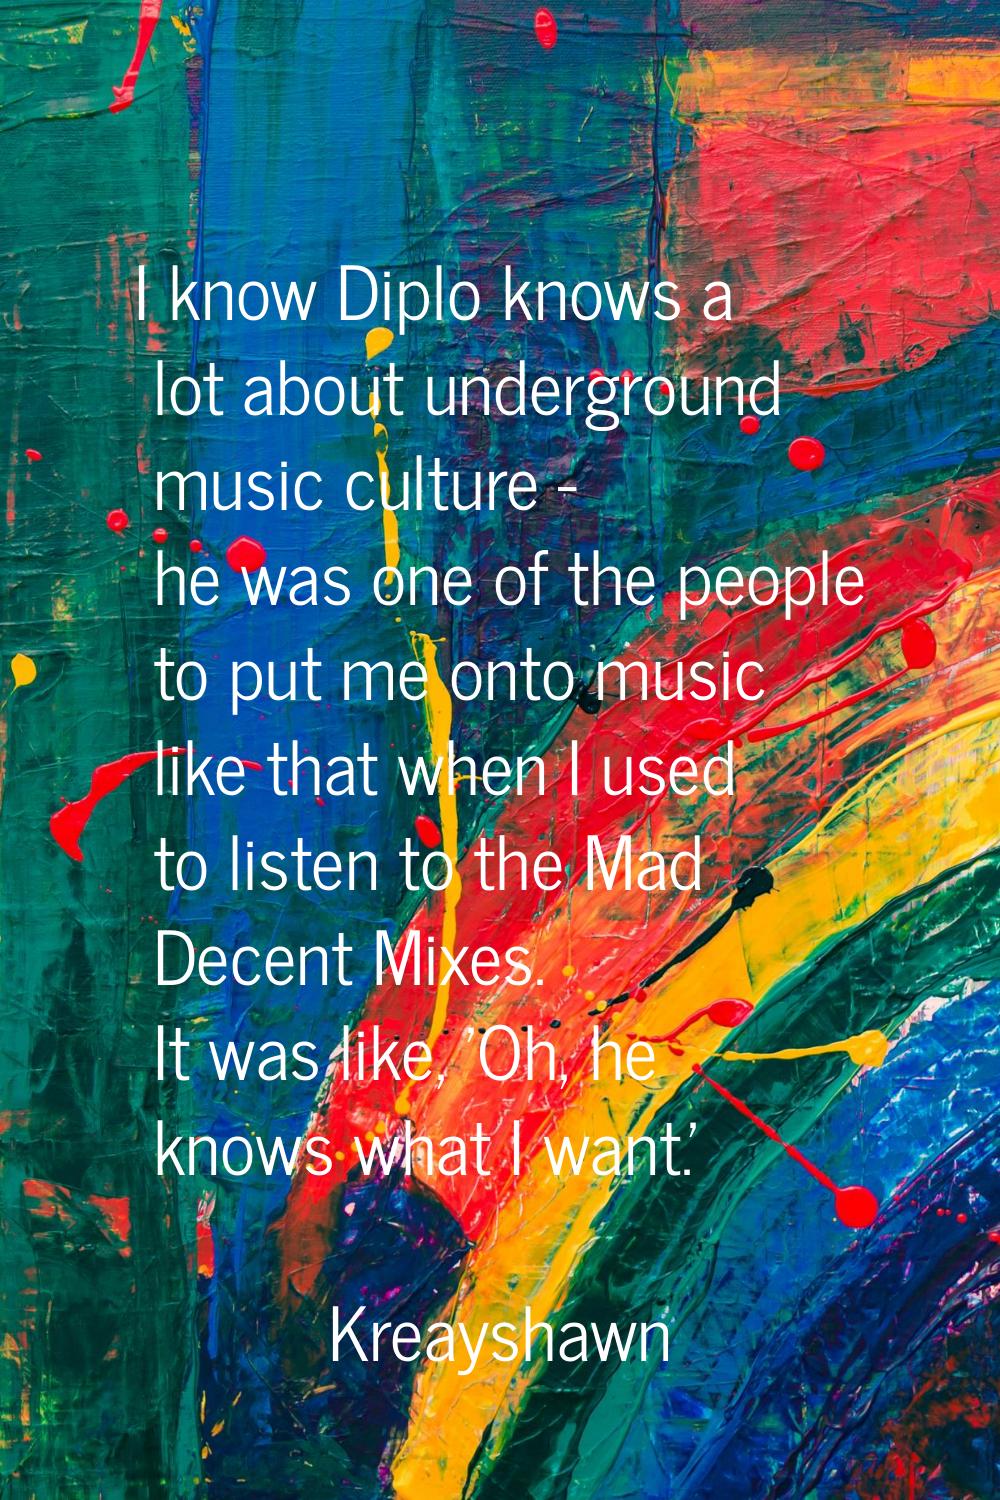 I know Diplo knows a lot about underground music culture - he was one of the people to put me onto 